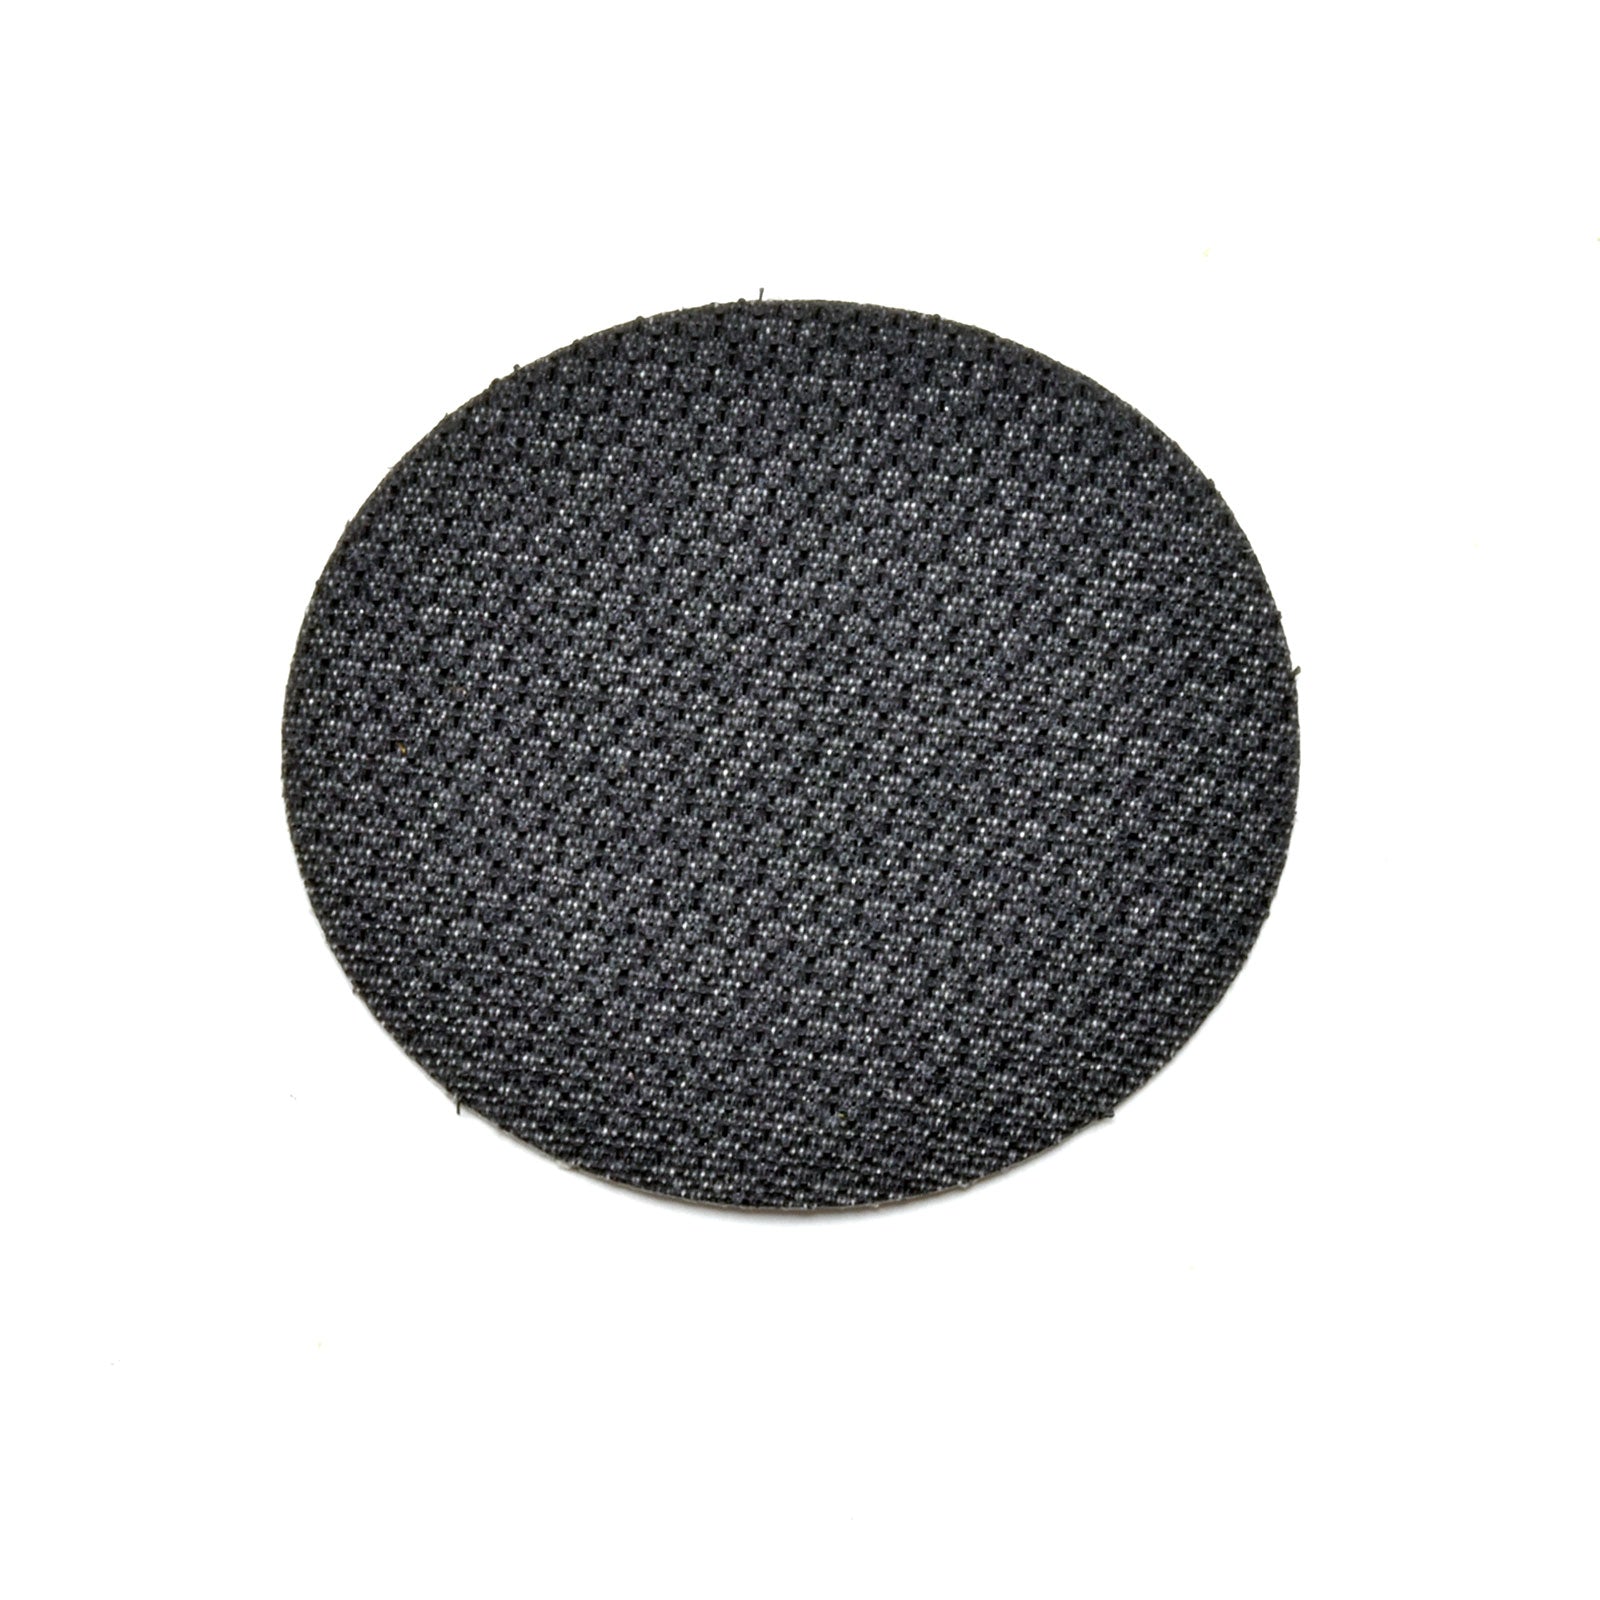 2 - 3/8" Hook - Backed Disk with PSA Backing for MicroLux® Sander/Drill - Micro - Mark Sanding Accessories